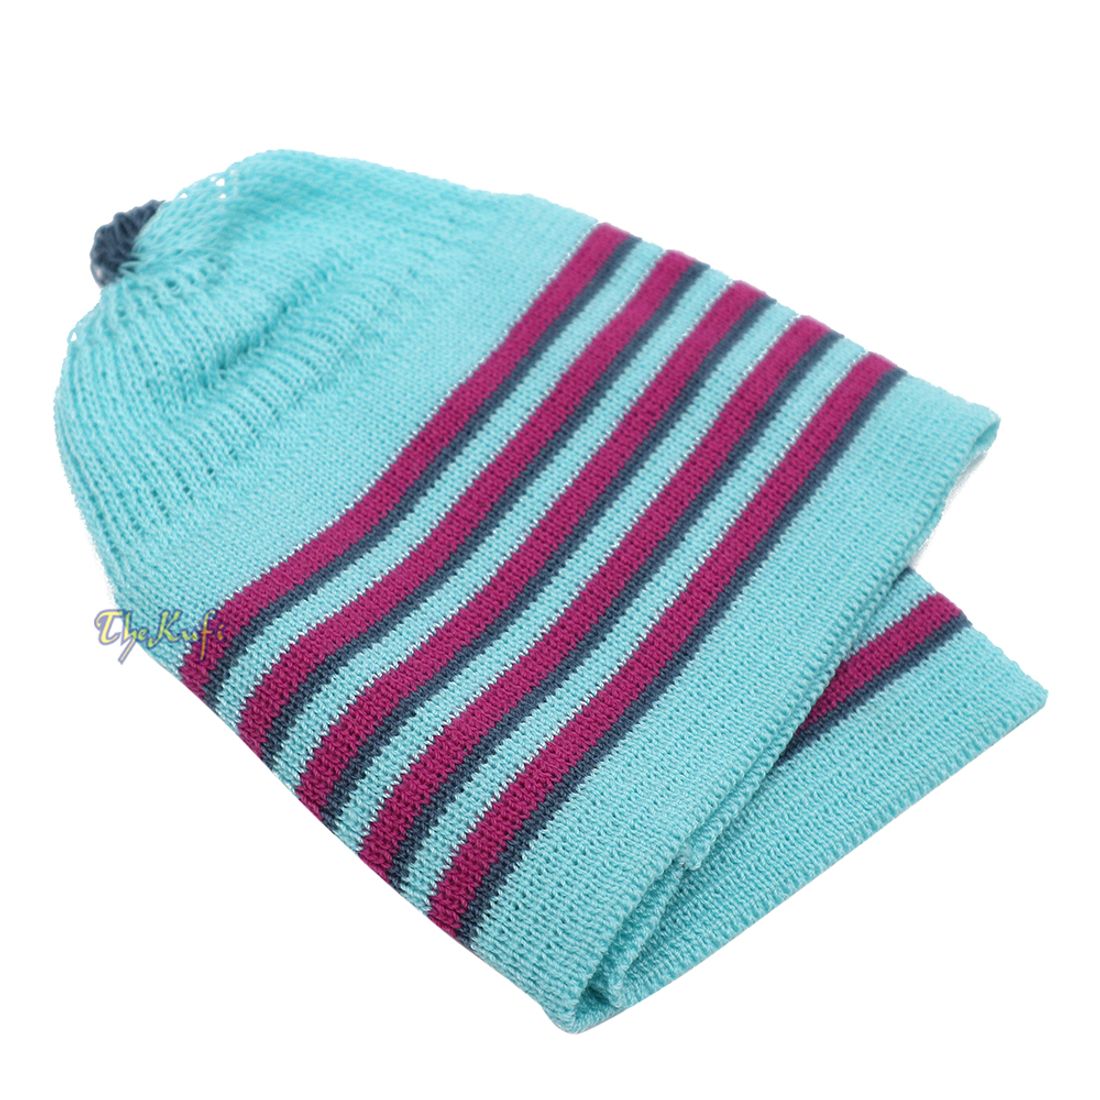 Light Turquoise Blue with Light Maroon and Dark Green Lines Baby or Infant Kufi Pompom Stretchable Beanie